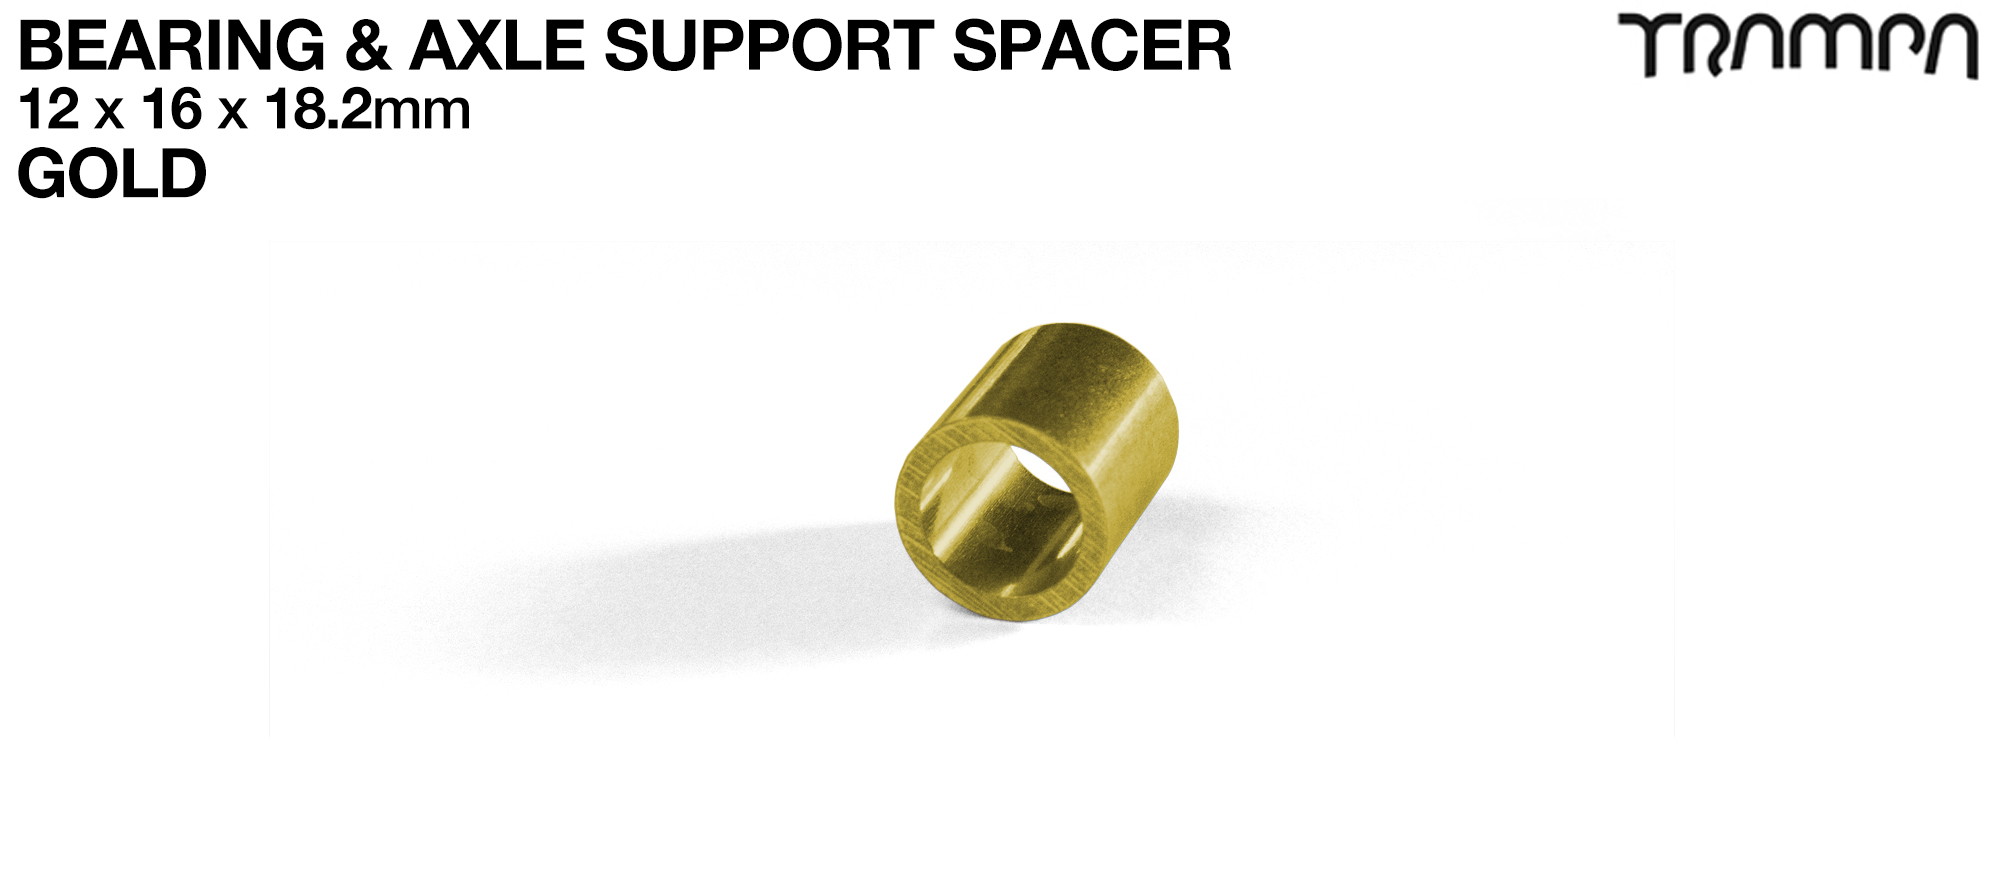 Wheel Support Axle Spacers - GOLD 